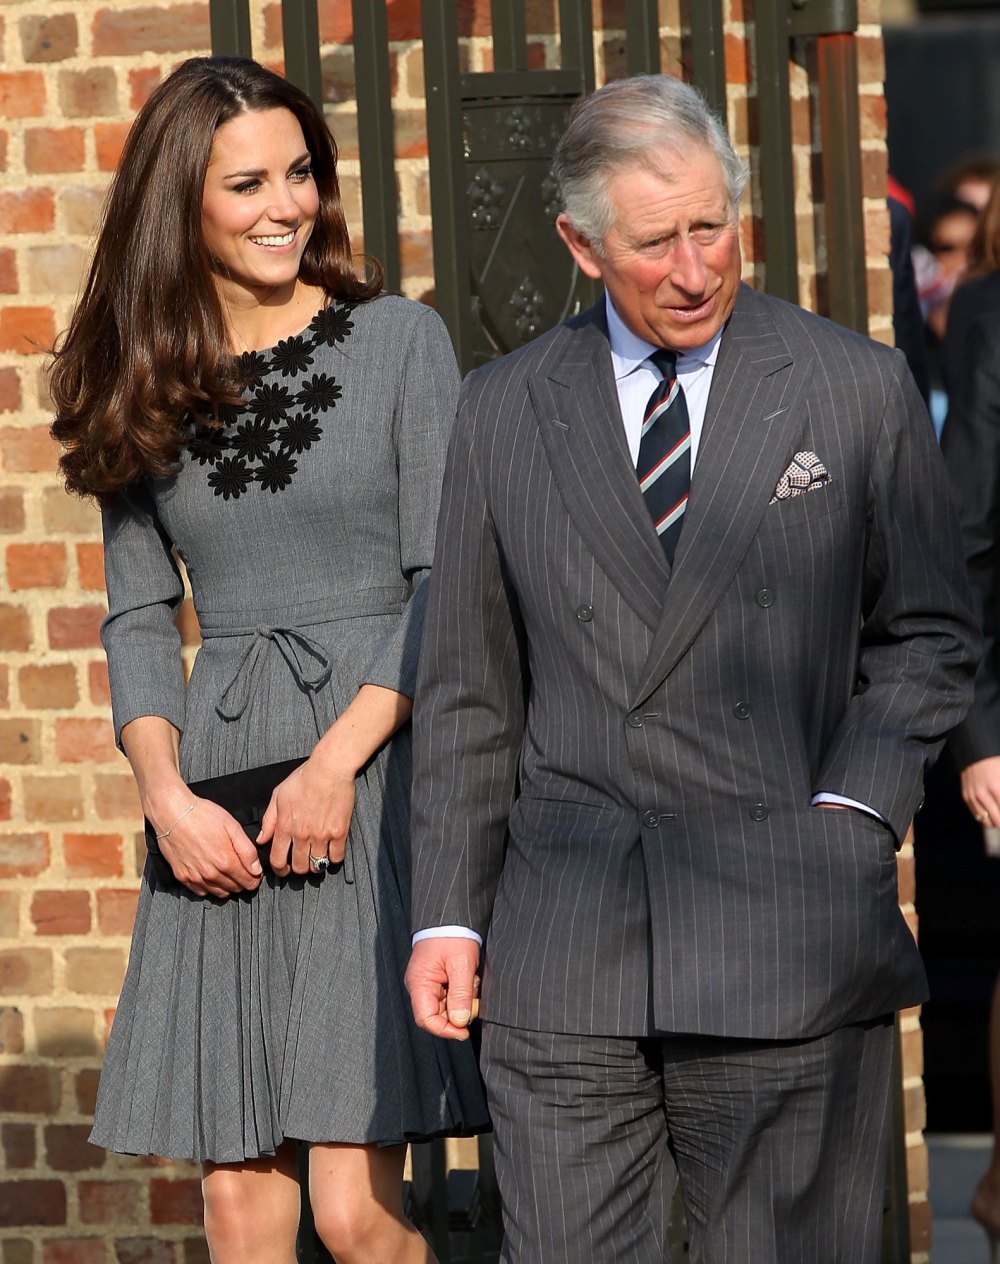 KIng Charles and Princess Kate are undergoing cancer treatment